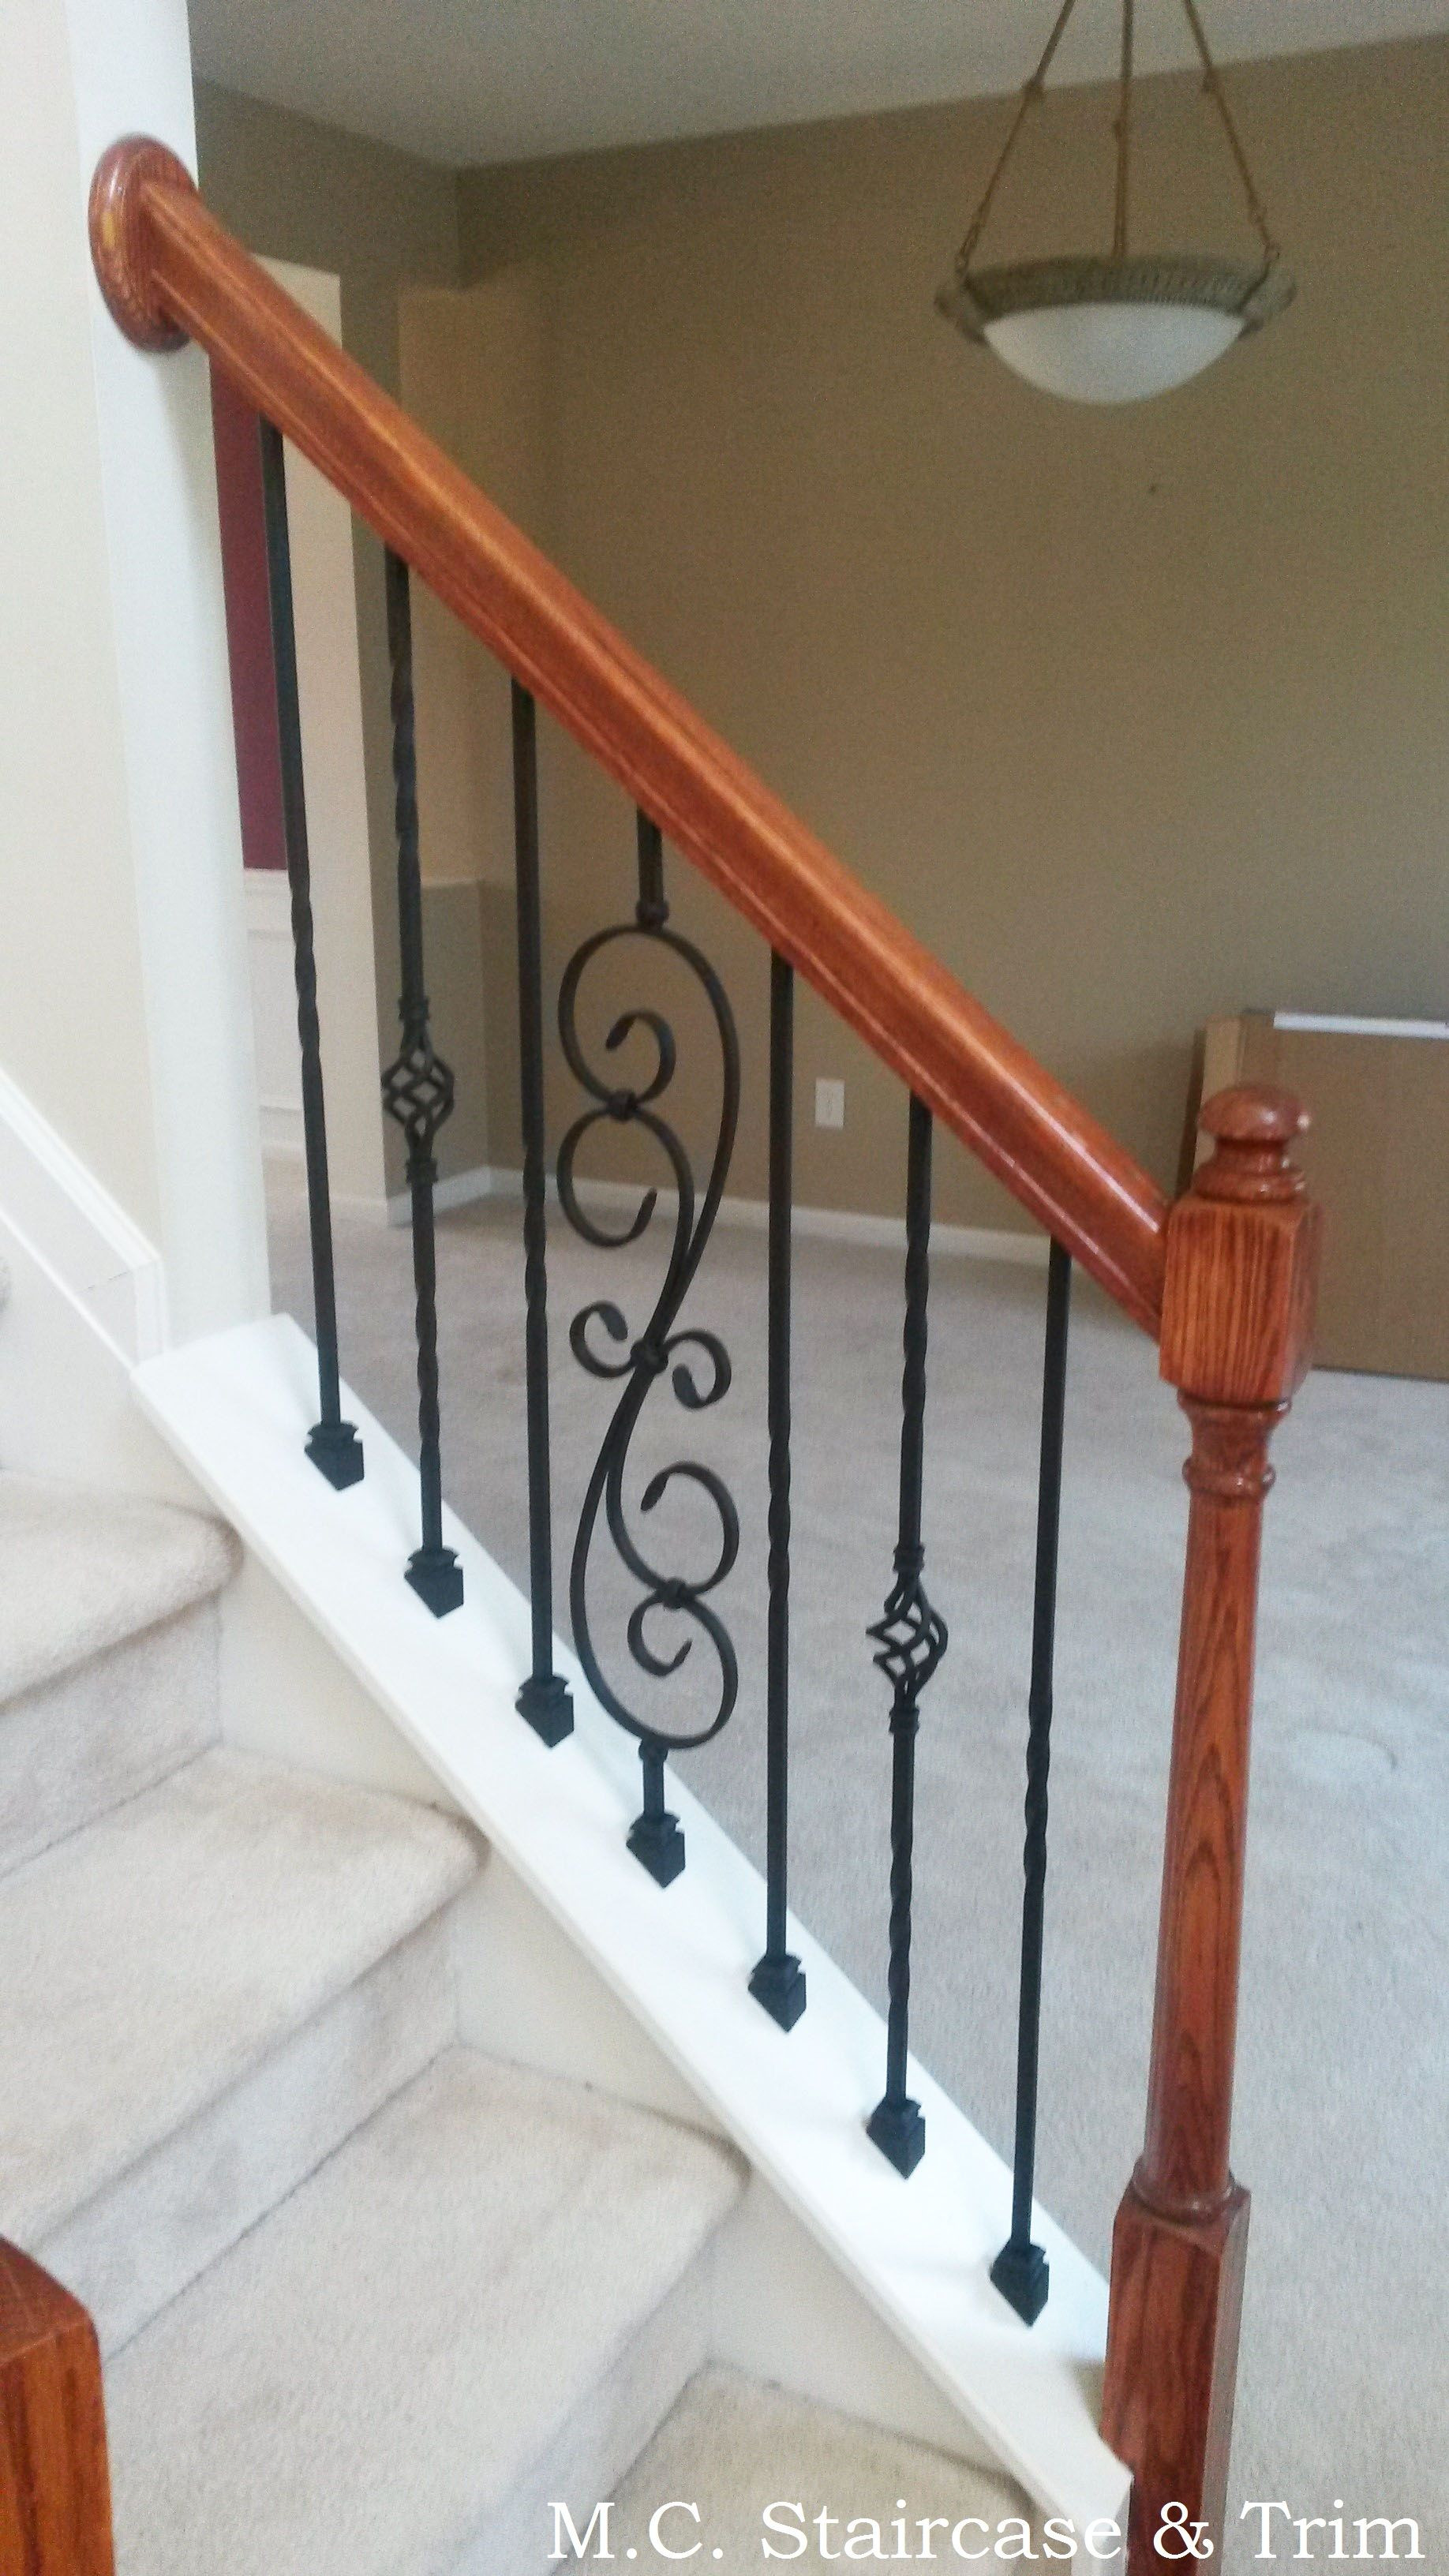 install hardwood floor around stairs of iron baluster upgrade from m c staircase trim removal of wooden with iron baluster upgrade from m c staircase trim removal of wooden balusters and installation of alternating twist series single twist and single basket